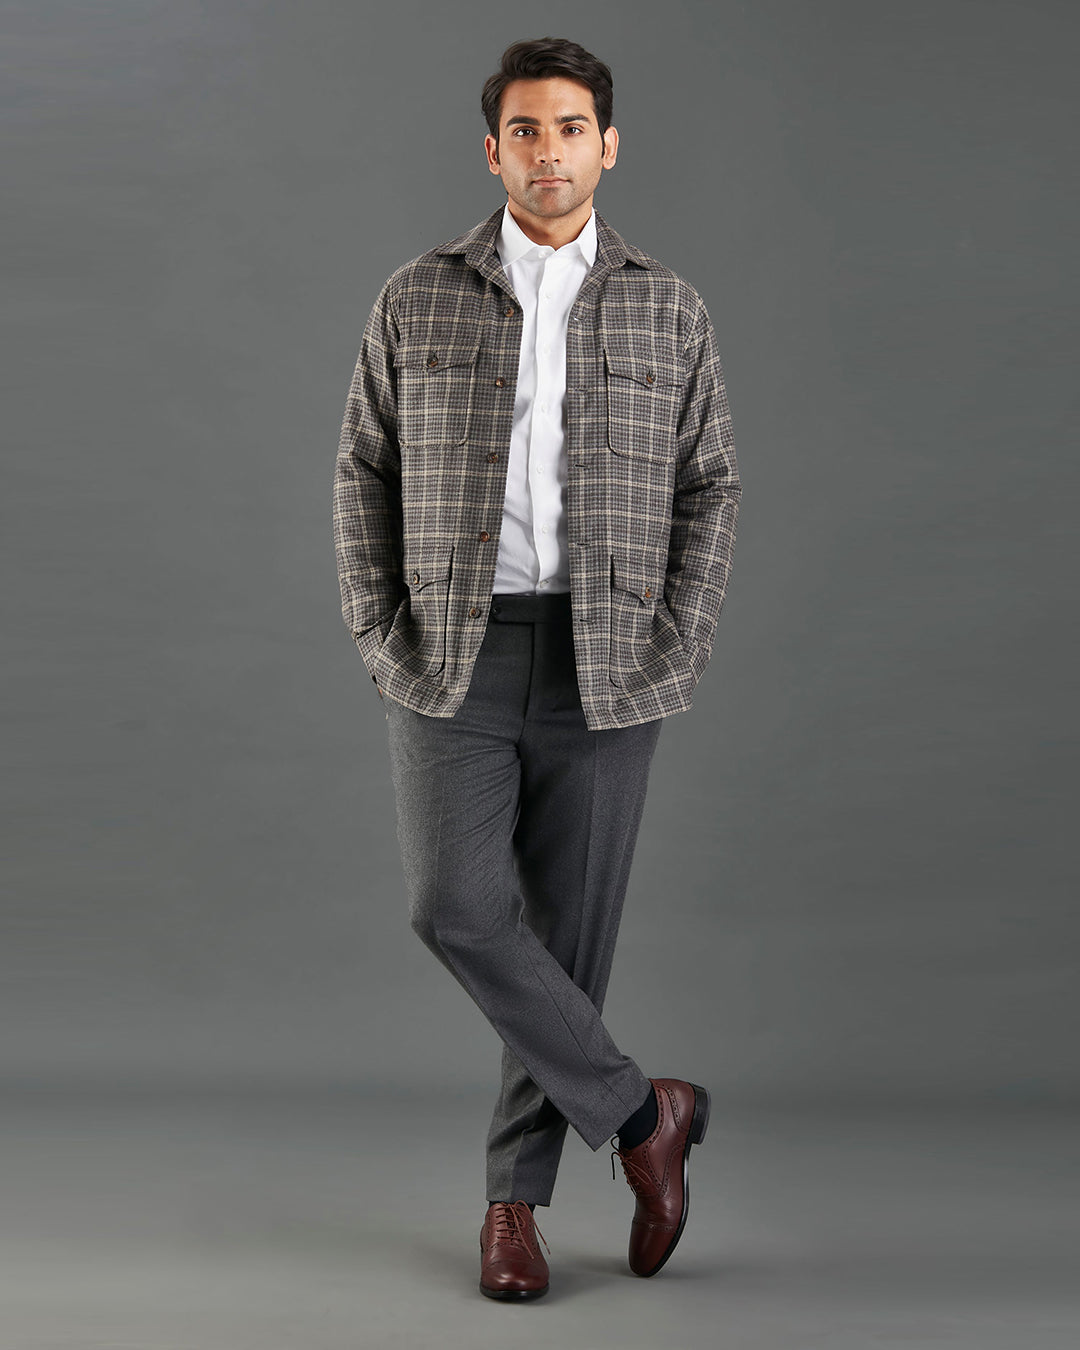 Front of model wearing the shirt jacket for men by Luxire in brown and grey overchecks hands in pockets